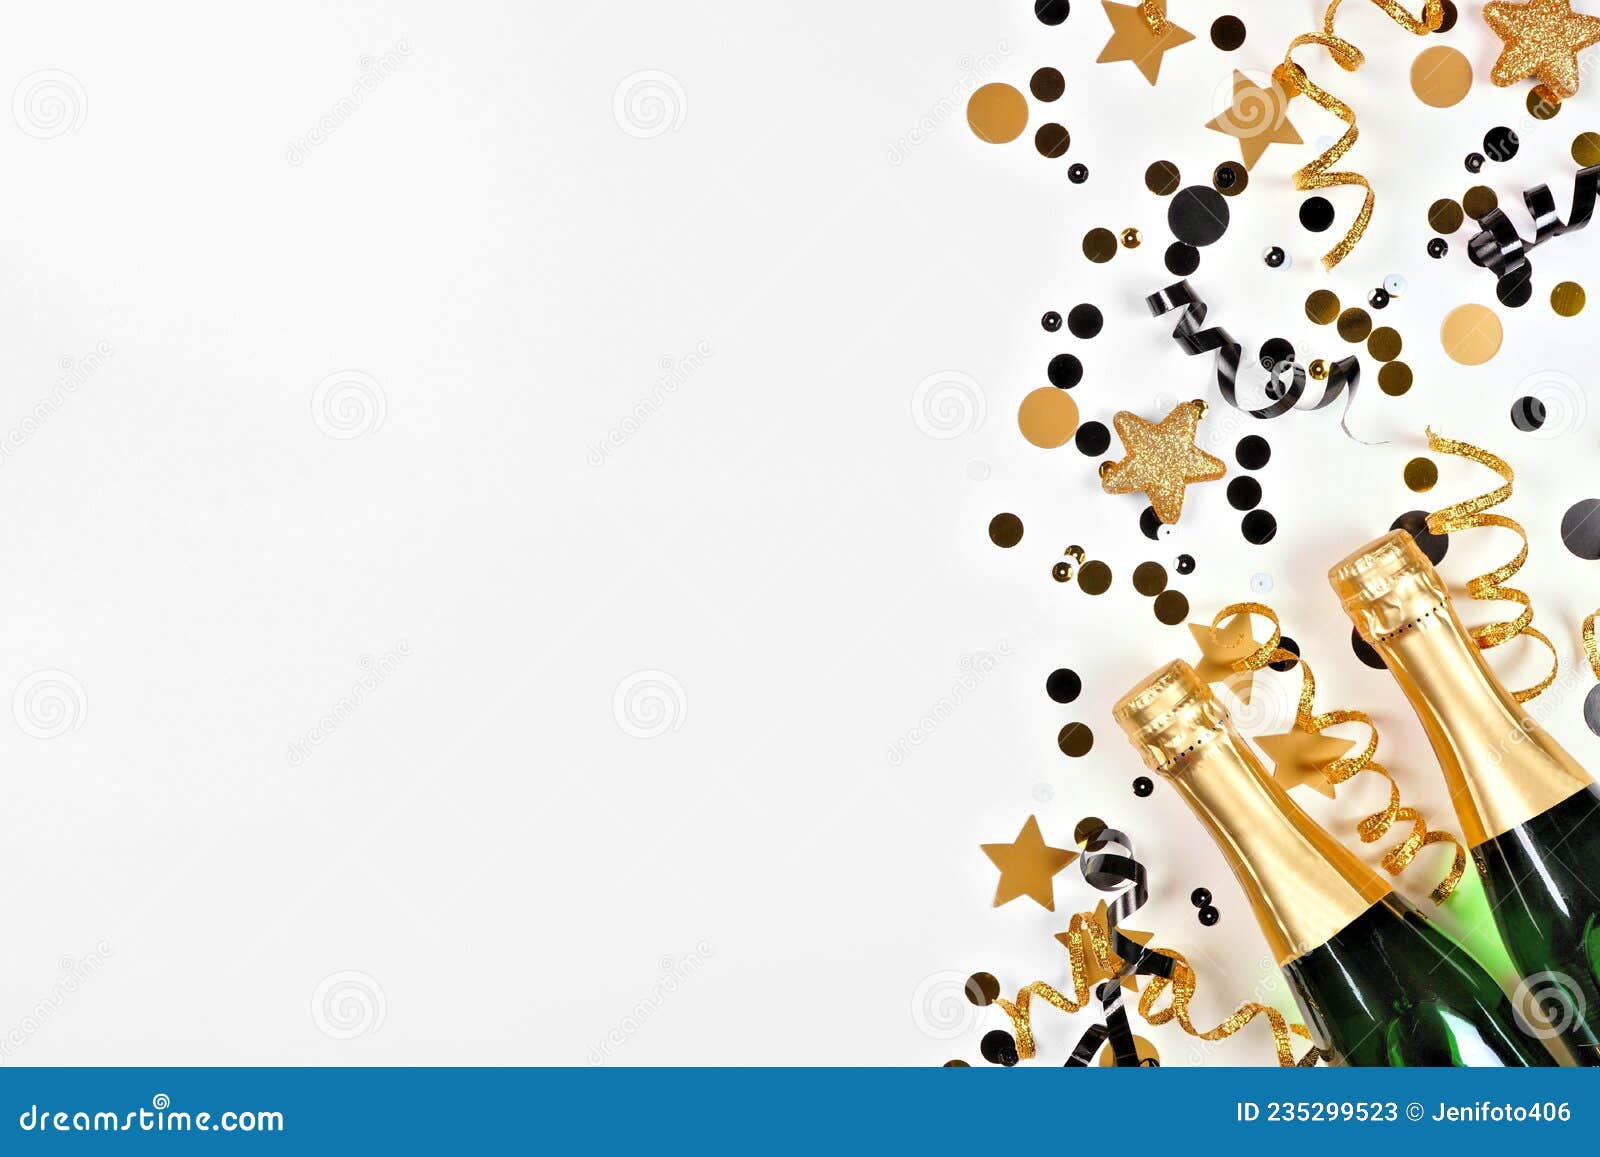 New Years Eve Side Border of Gold and Black Confetti, Streamers and  Champagne Over a White Background Stock Image - Image of black, alcohol:  235299523